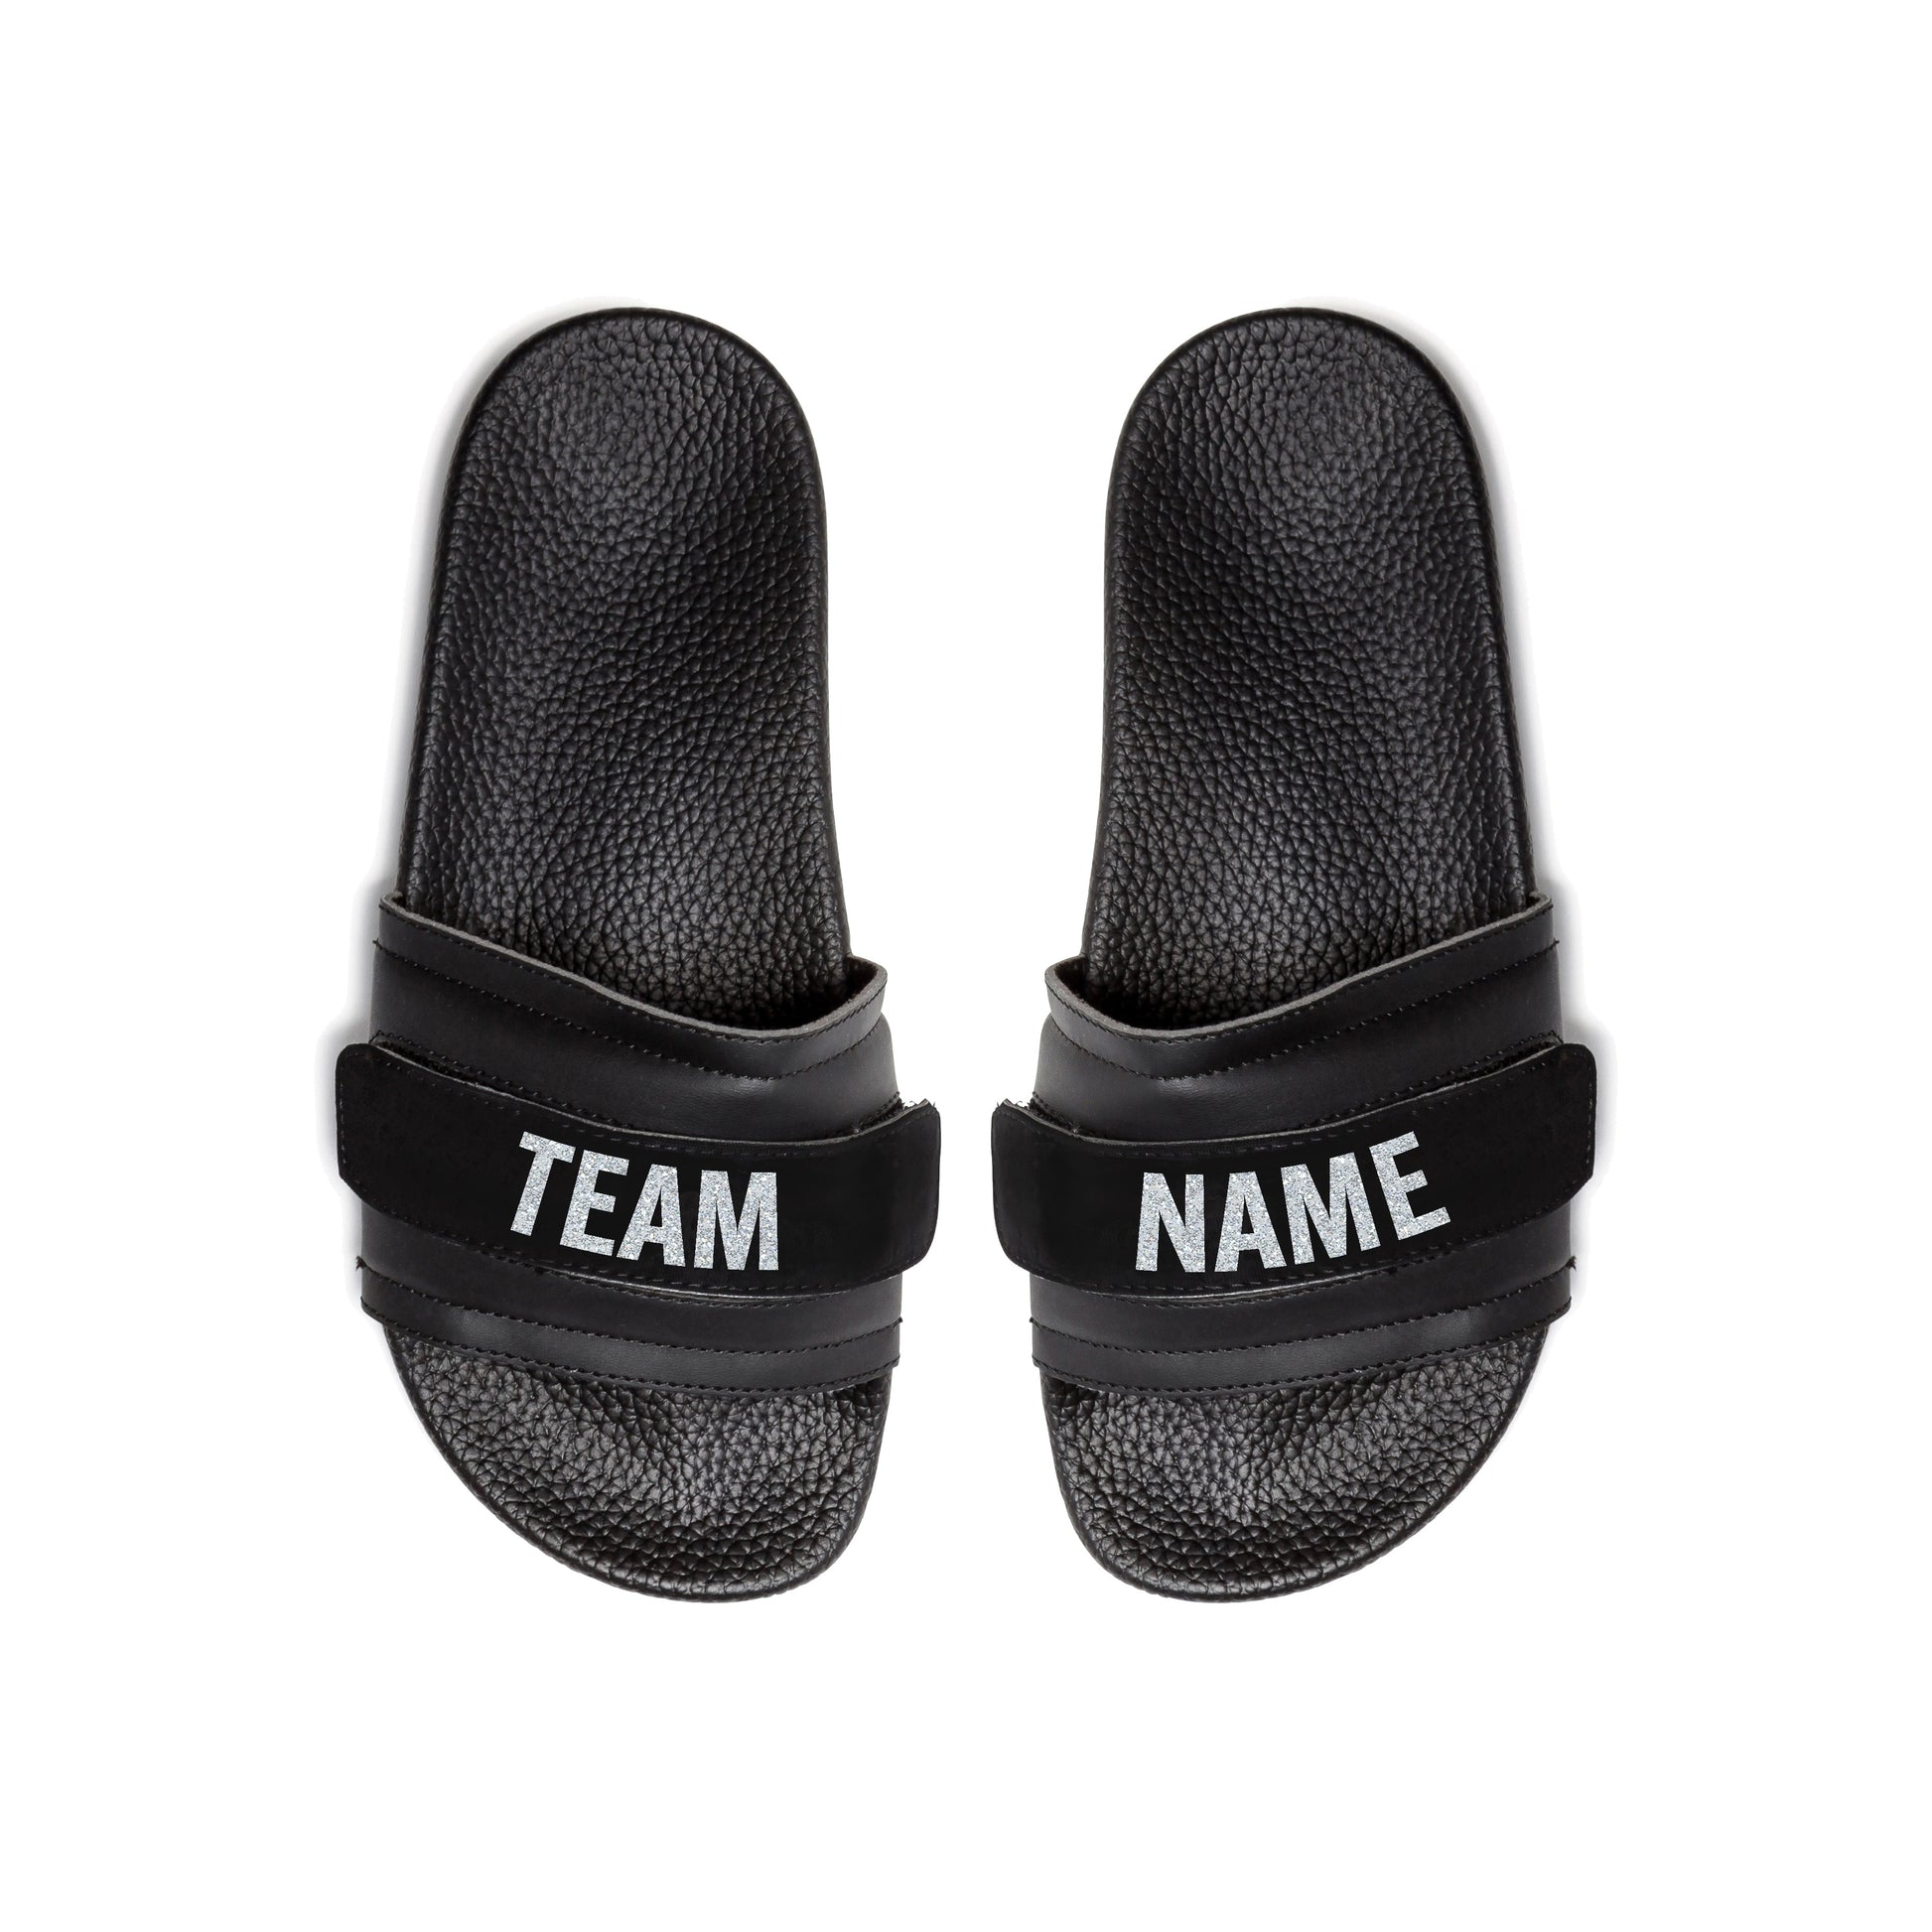 Pair of Pastry Adult Women's Recovery Slide in Black with Team Name Straps